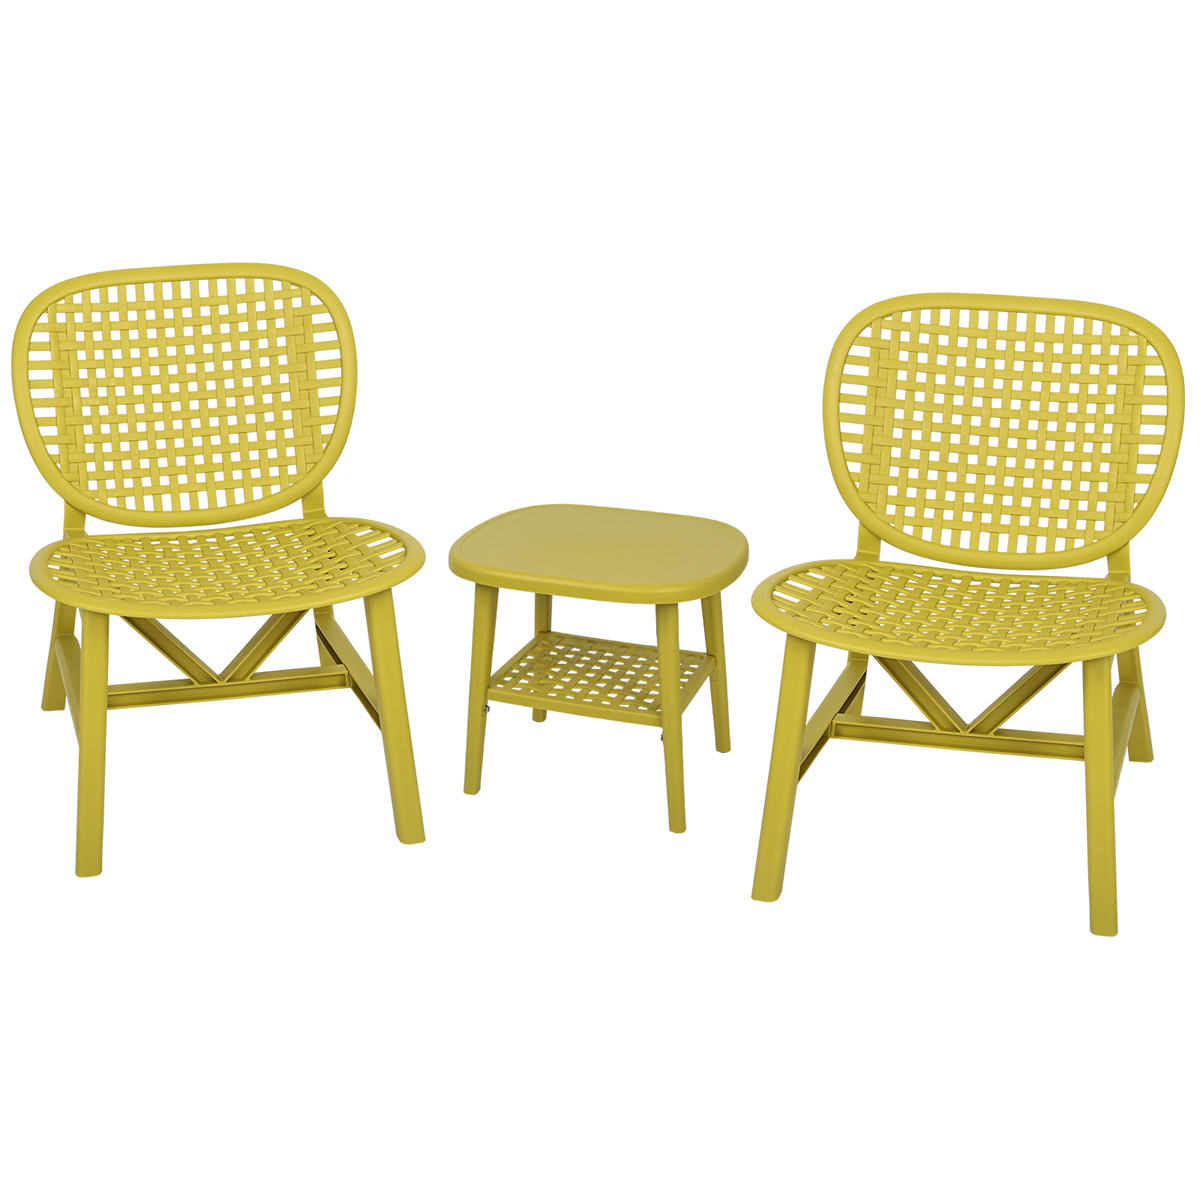 3Pcs Patio Table Chair Set, Bistro Set Hollow Conversation Coffee Table Set with 1 End Table & 2 Lounge Chairs, All Weather Outdoor Patio Chair with Widened Seat for Balcony Garden Yard, Yellow - image 2 of 7